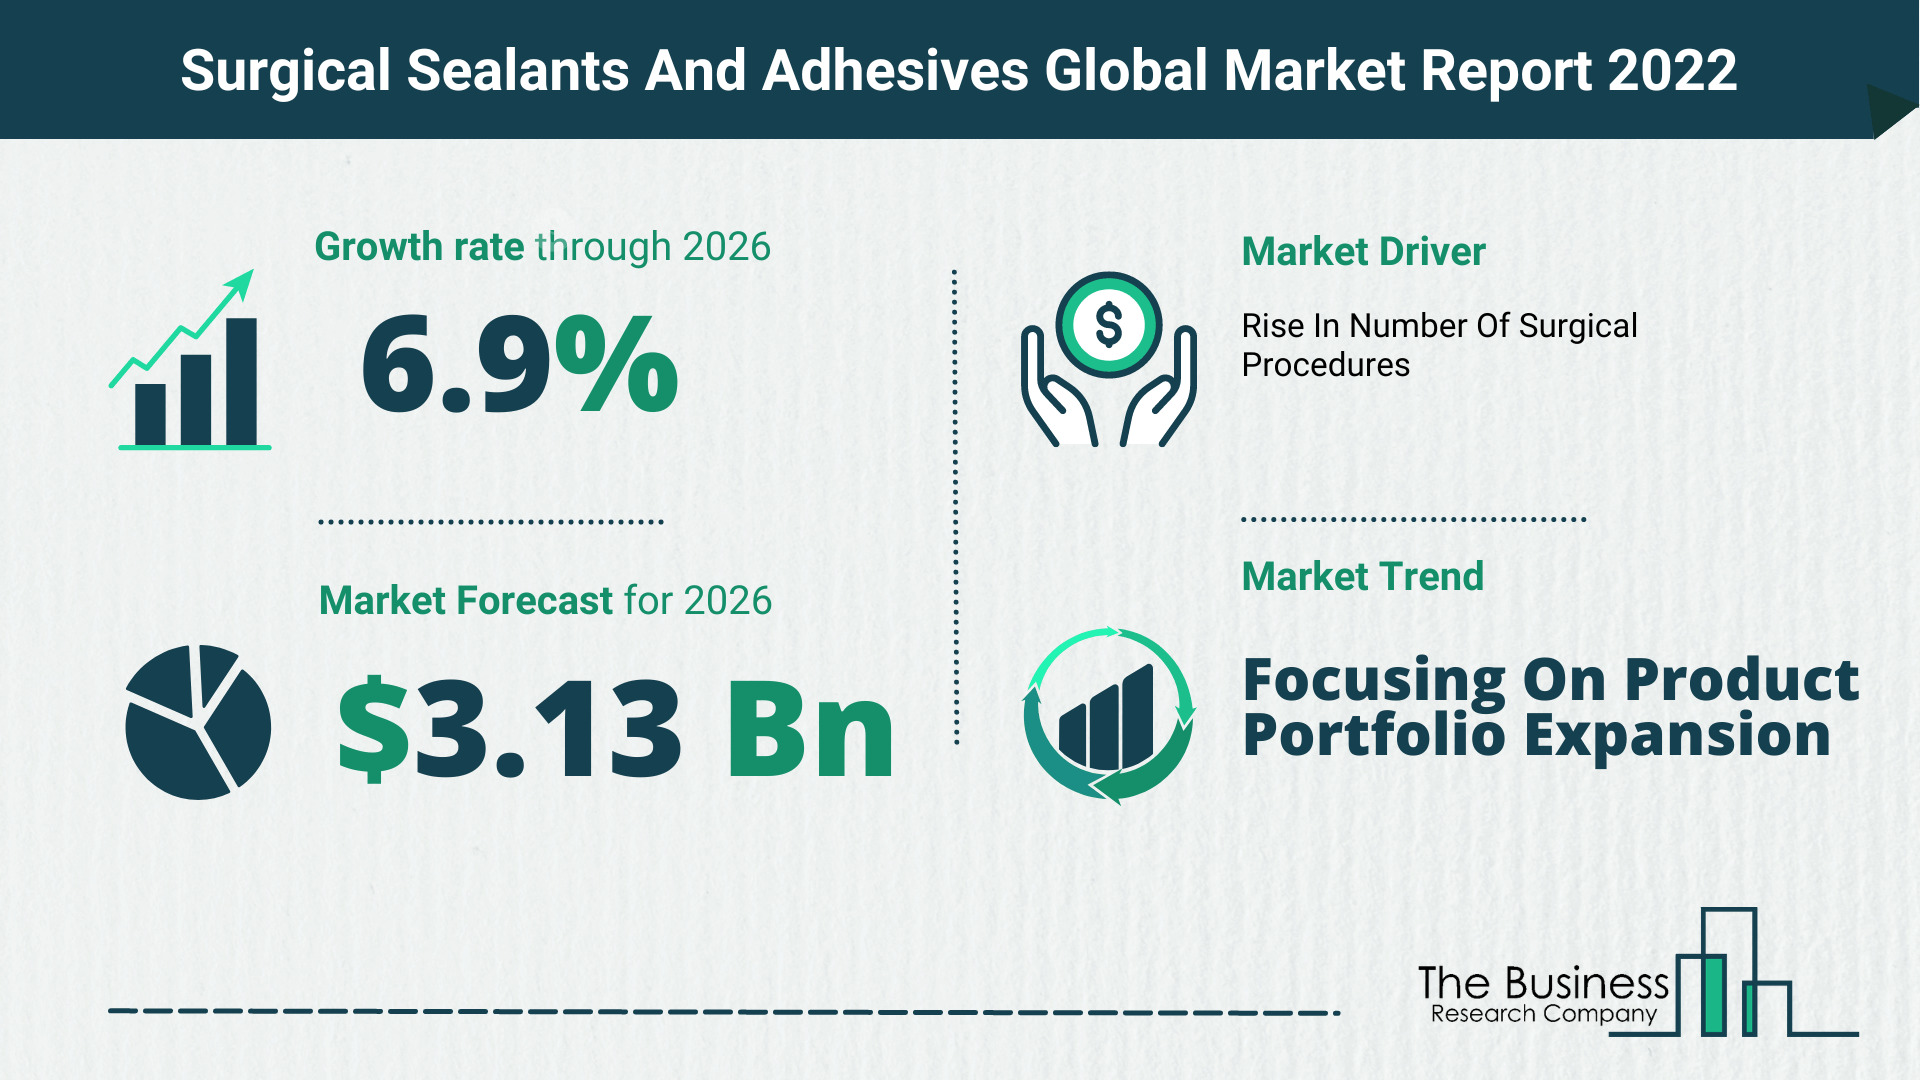 Latest Surgical Sealants And Adhesives Market Growth Study 2022-2026 By The Business Research Company